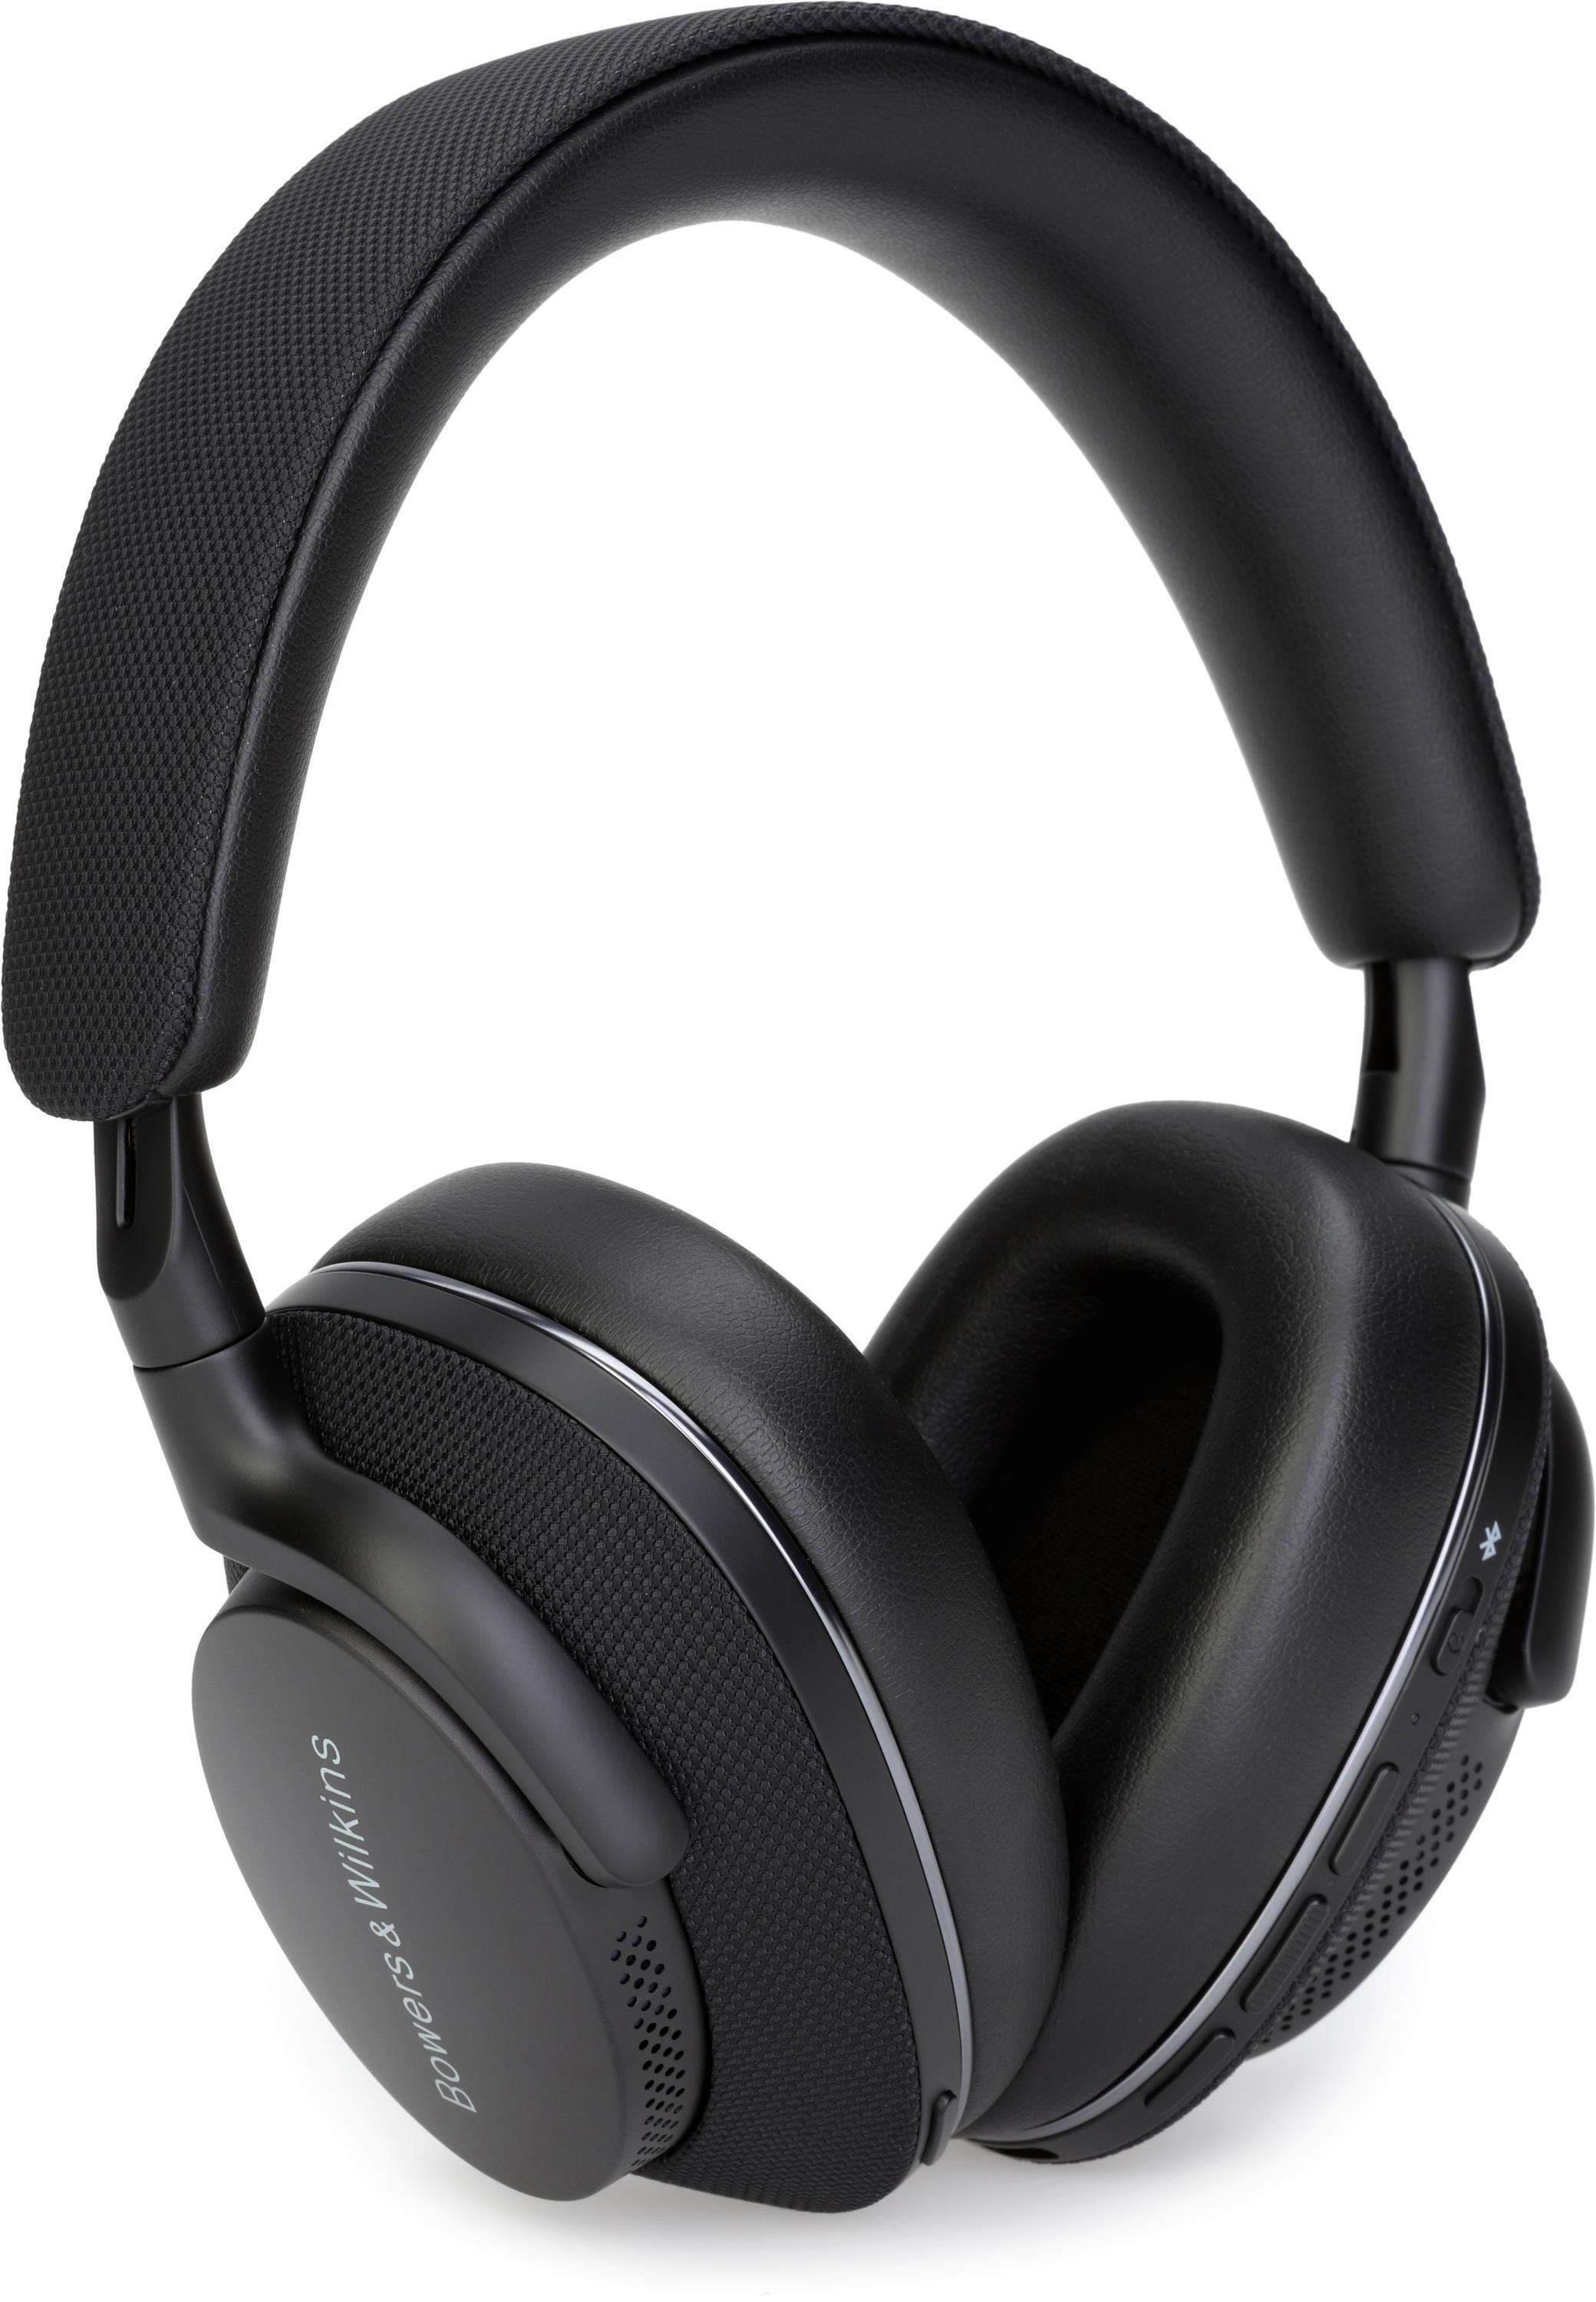 Bowers & Wilkins PX7 S2e Over-ear Noise-canceling Headphones with 